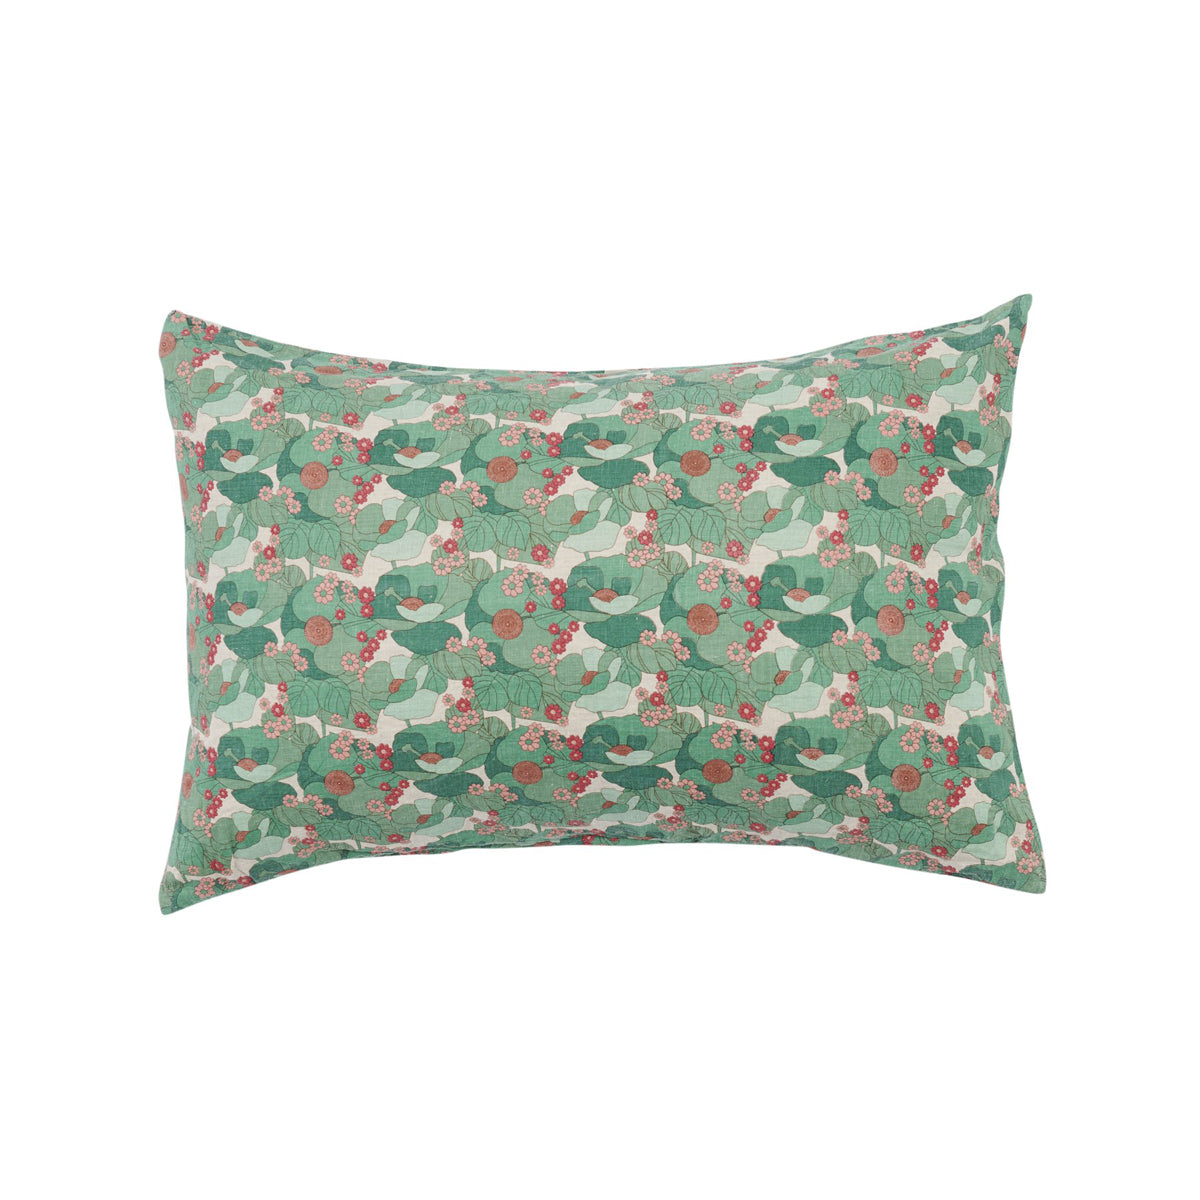 Society of wanderers winifred Floral Pillowcase Sets